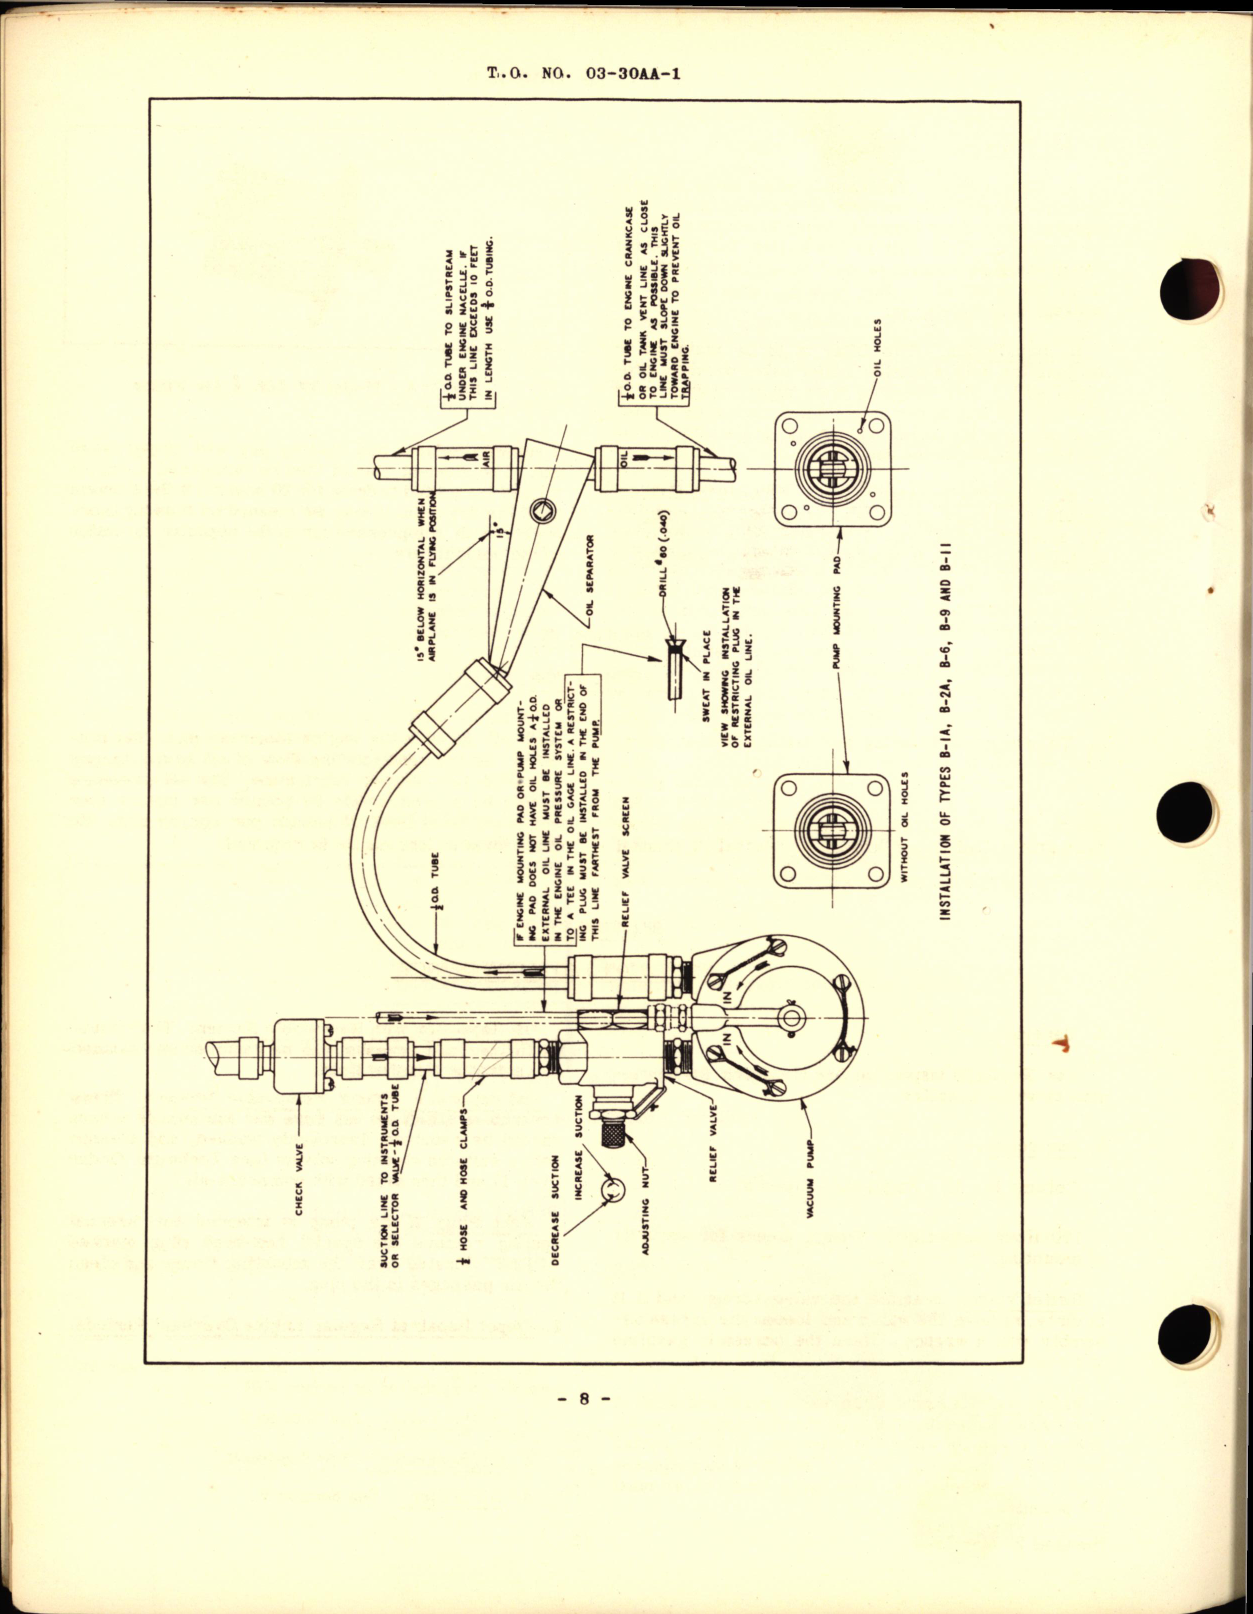 Sample page 6 from AirCorps Library document: Operation, Service and Overhaul Instructions with Parts Catalog for Engine-Driven Vacuum Pumps